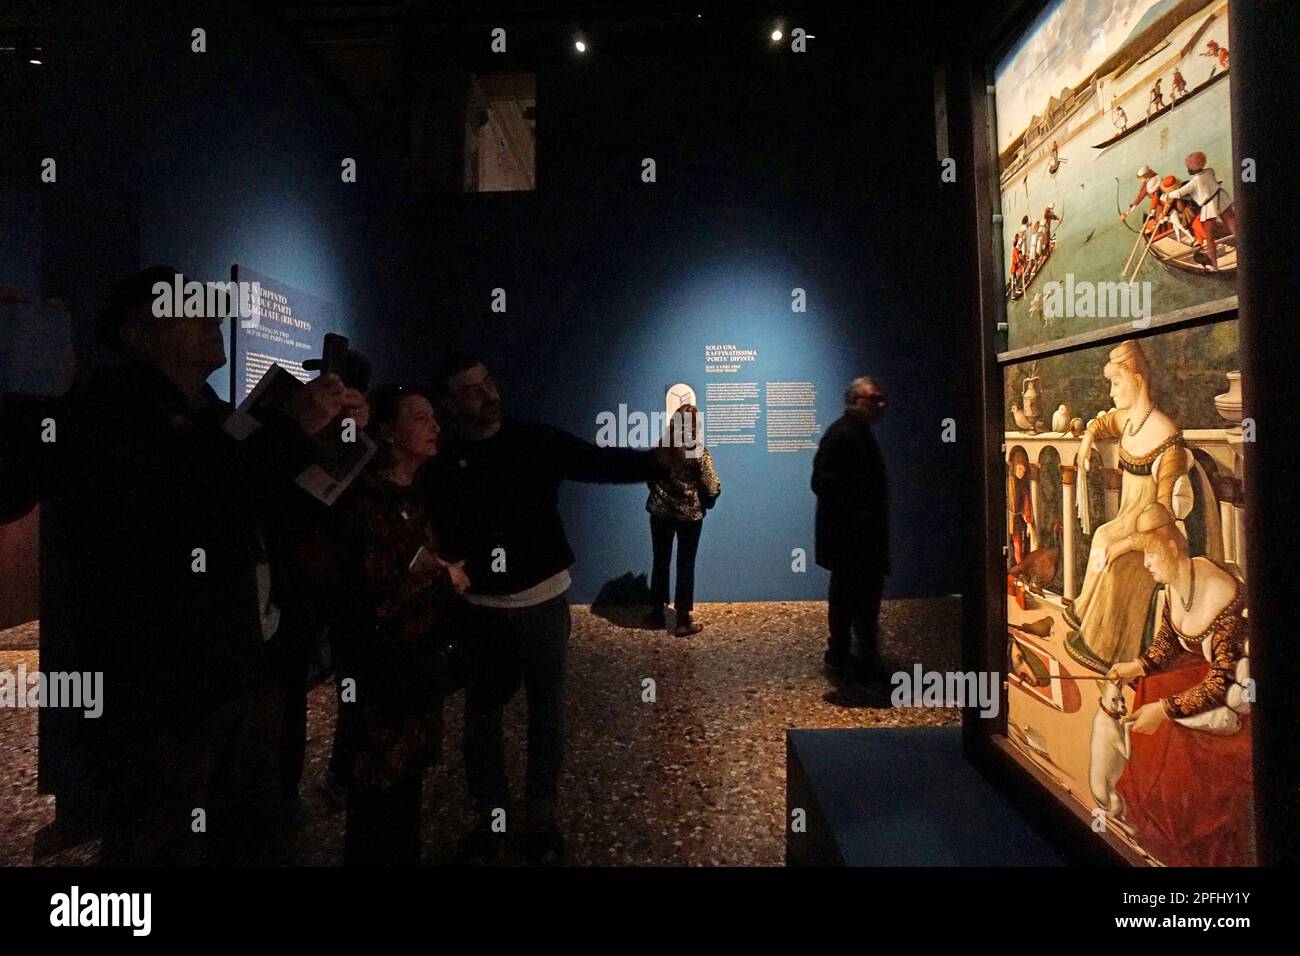 Visitors take photos of 'The Hunt in the Lagoon' and 'Two Venetian Ladies', a single painting on a door created by Vittore Carpaccio in 1492 and now finally recomposed after their separation in the late 17th century, today 17 March 2023 at the preview for the print at Palazzo Ducale. © ANDREA MEROLA Visitors take photos of 'The Hunt in the Lagoon' and 'Two Venetian Ladies', a single painting on a door created by Vittore Carpaccio in 1492 and now finally recomposed after their separation in the late 17th century, today 17 March 2023 at the preview for the print at Palazzo Ducale. © Andrew MEROL Stock Photo